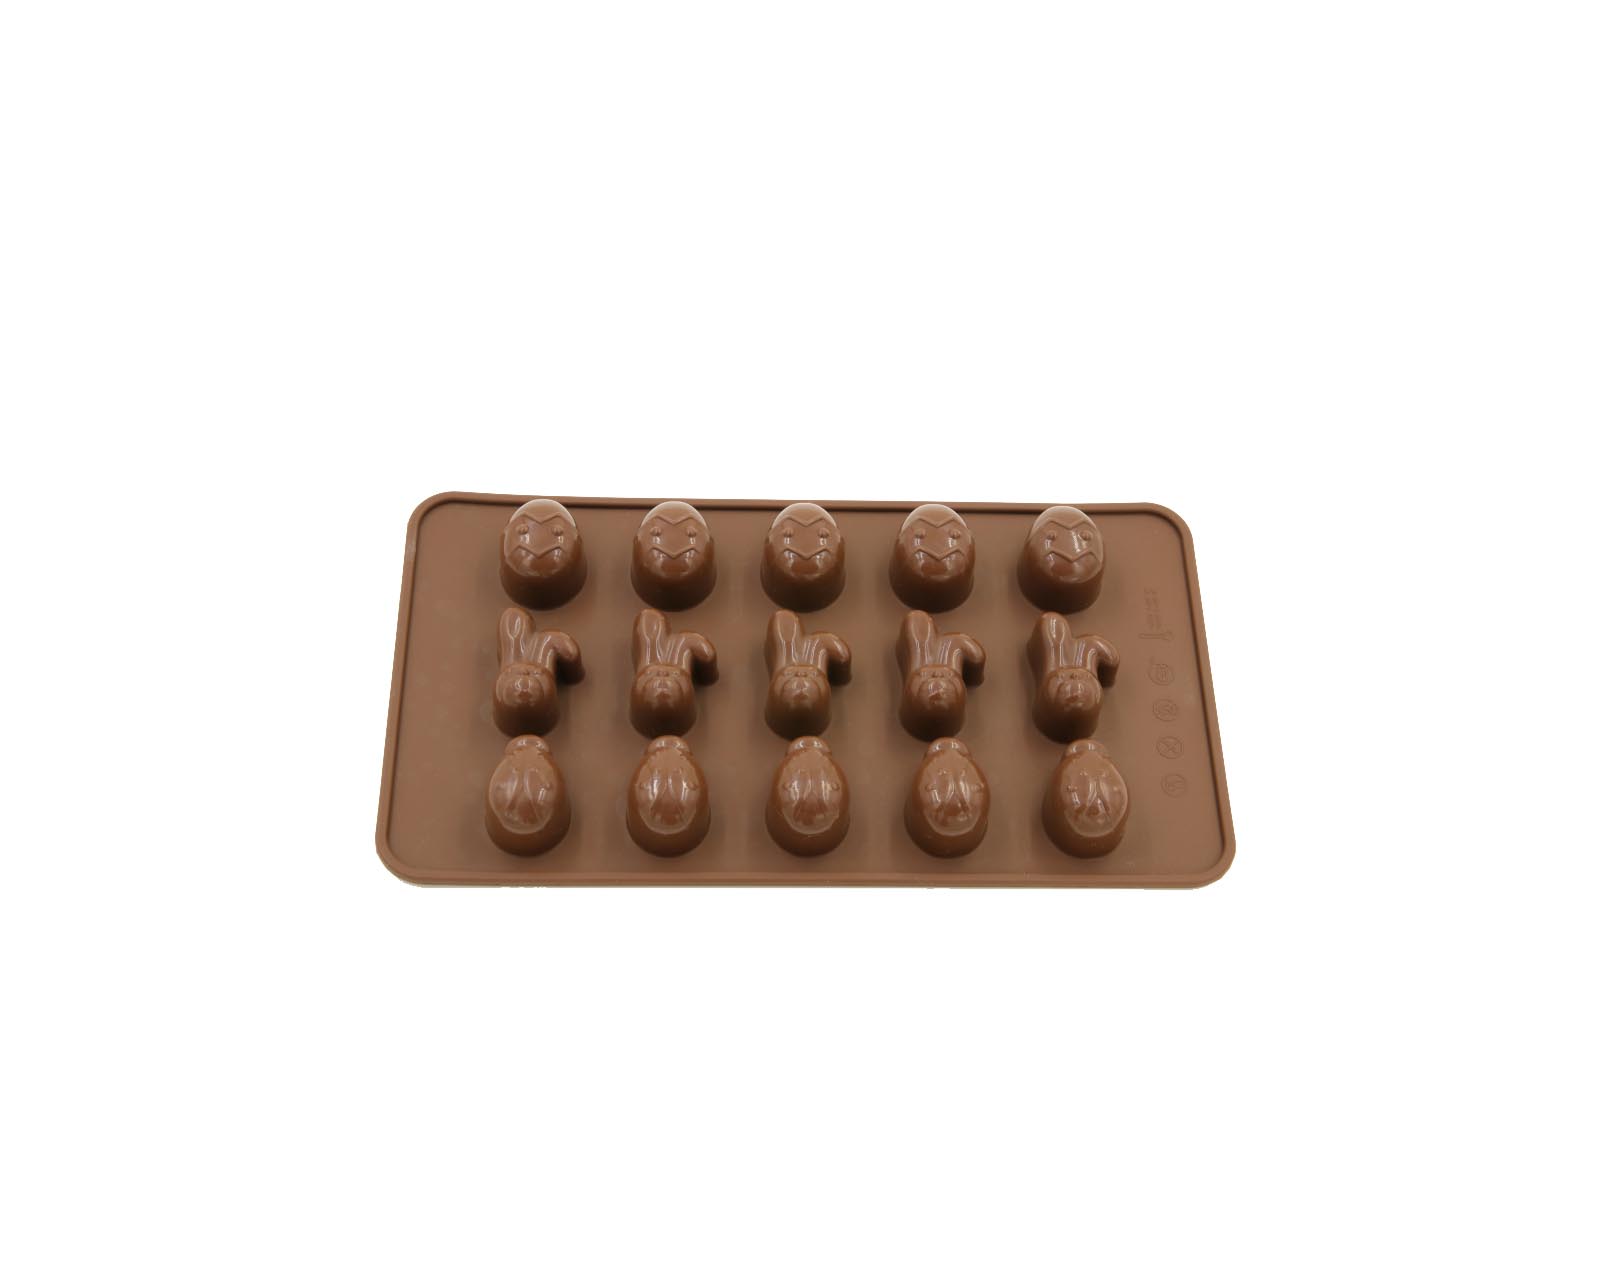 silicone mold | IC018 Easter chocolate mould/cake mould/ice tray